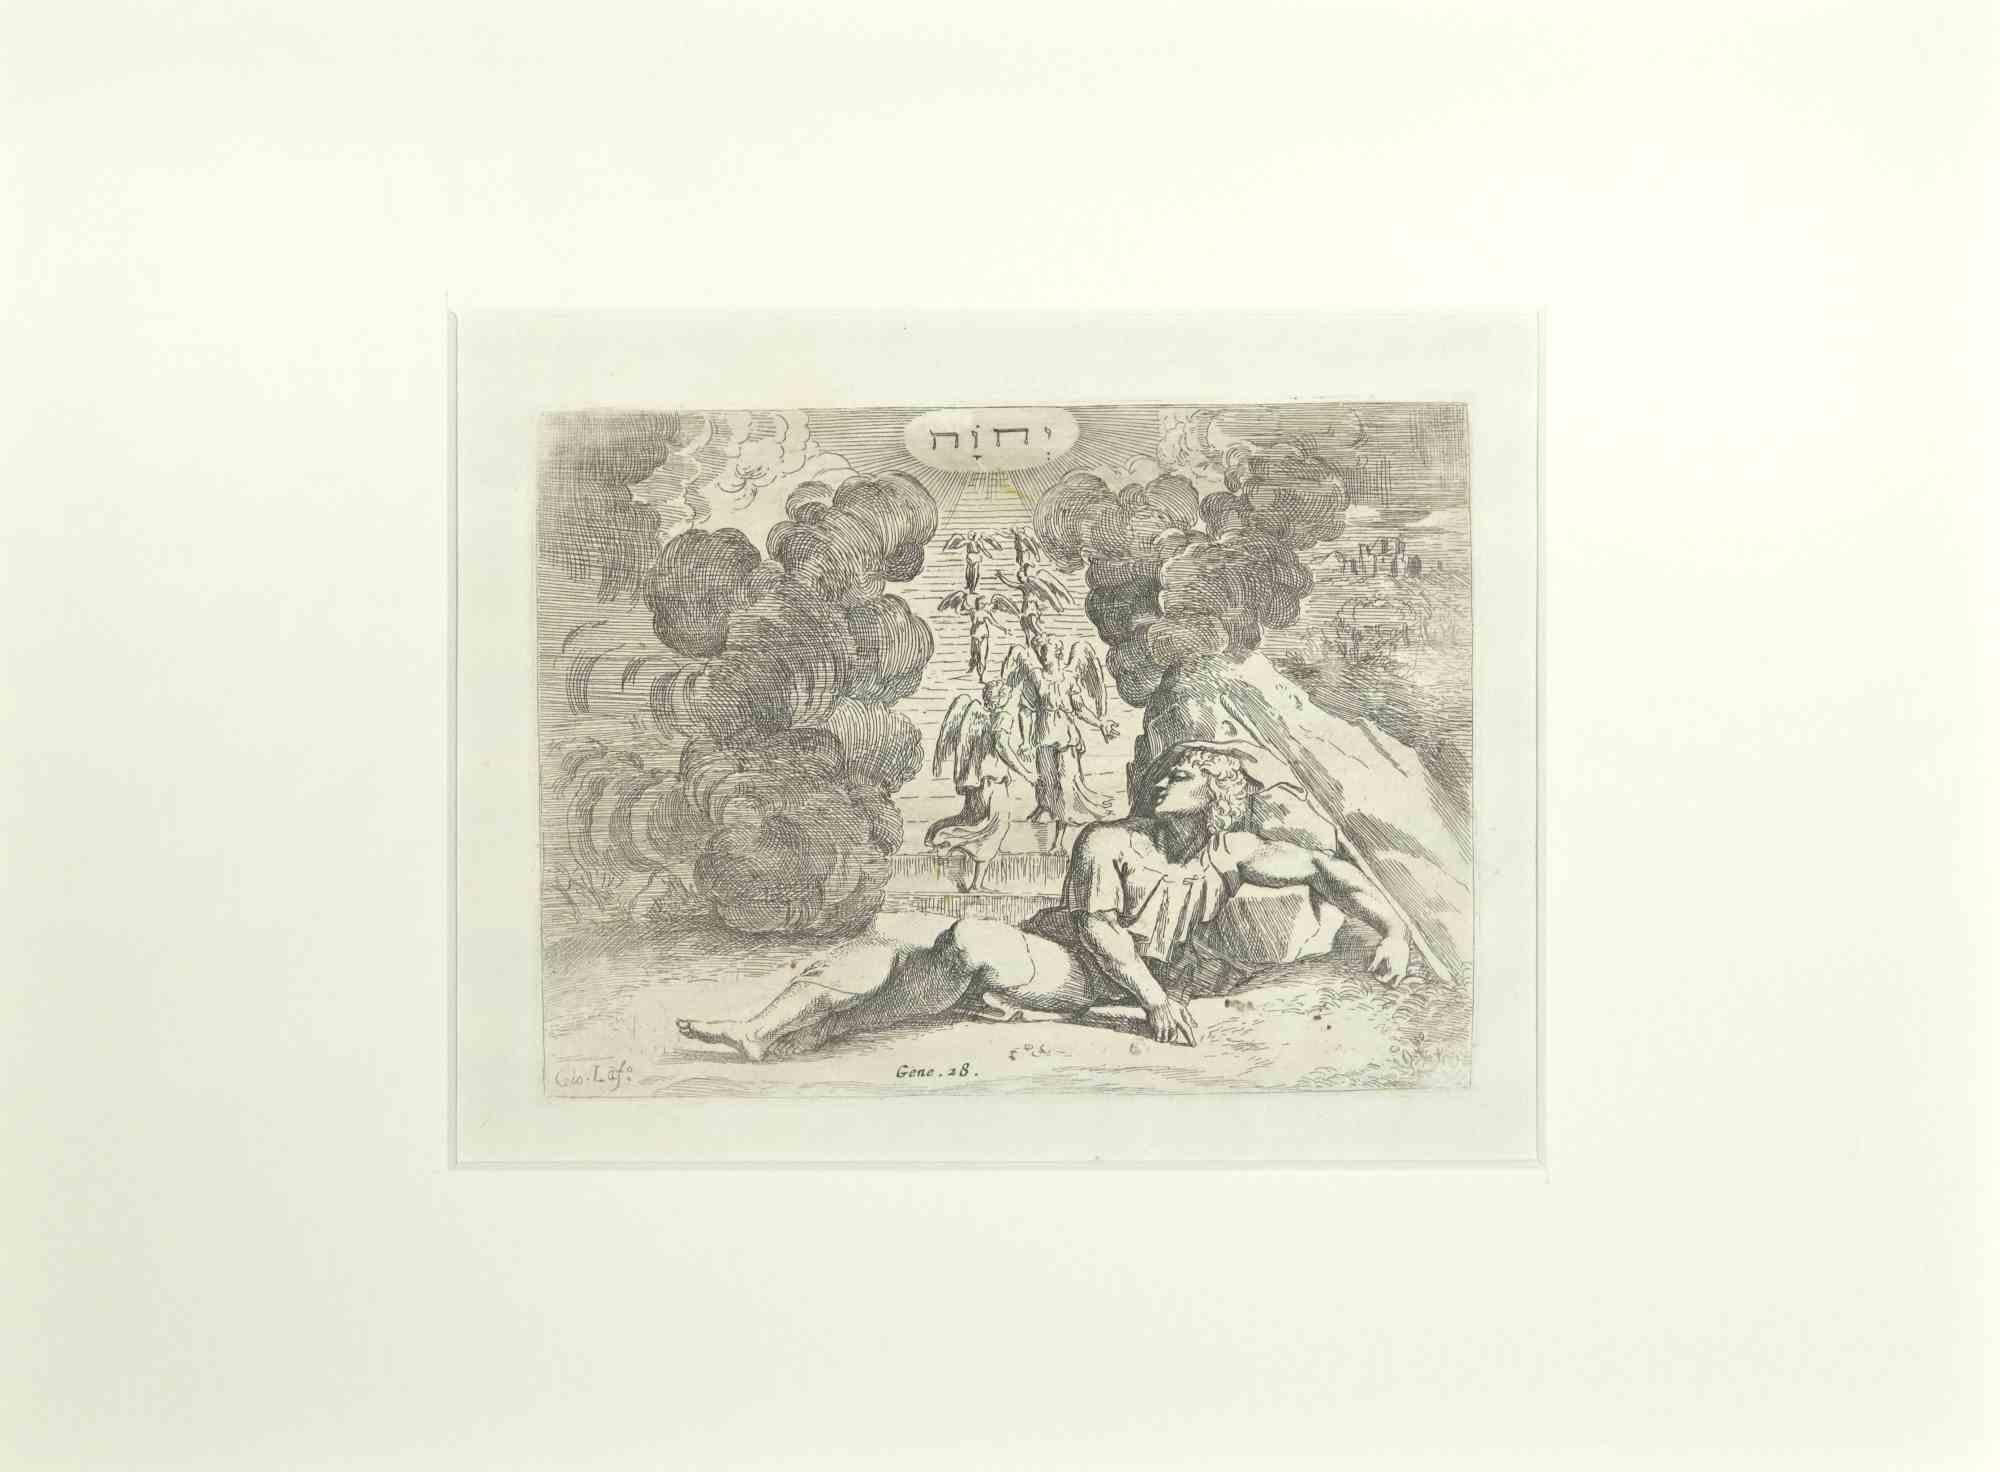 Giovanni Lanfranco (Terenzo, 1582 - Rome, 1647) Figurative Print - Genesis 28 - Old Testament Story - Etching by Giovanni Lanfranco - 1607